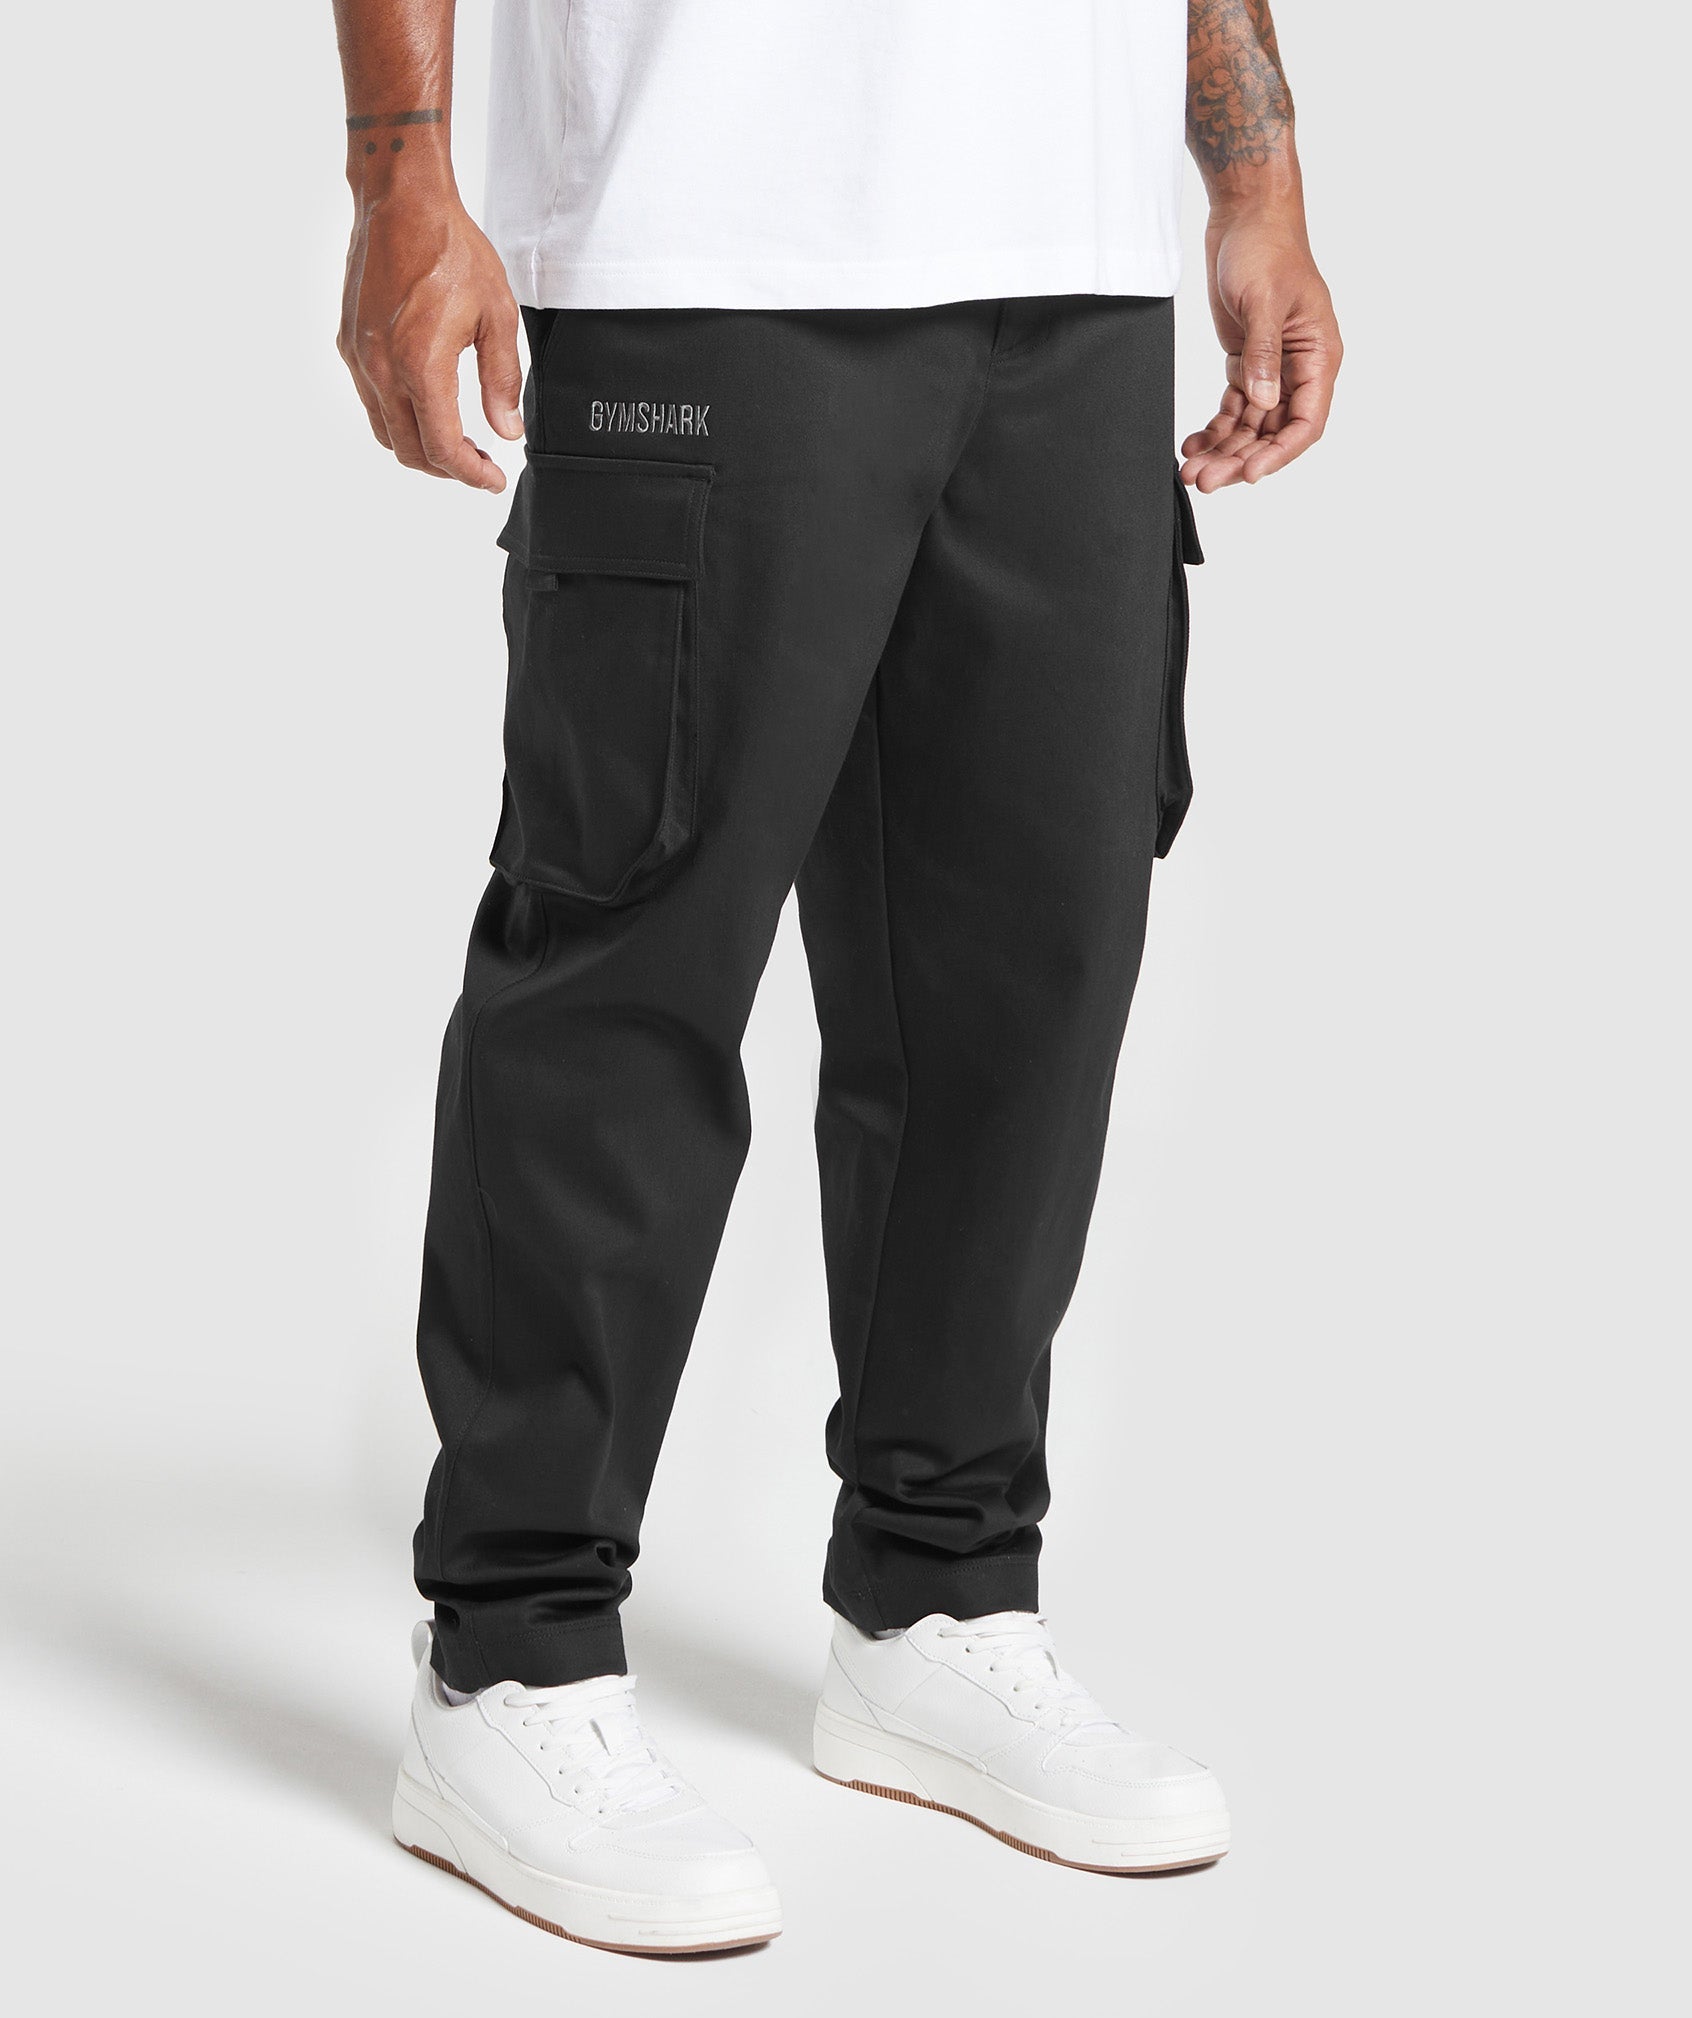 Rest Day Woven Cargo Pants in Black